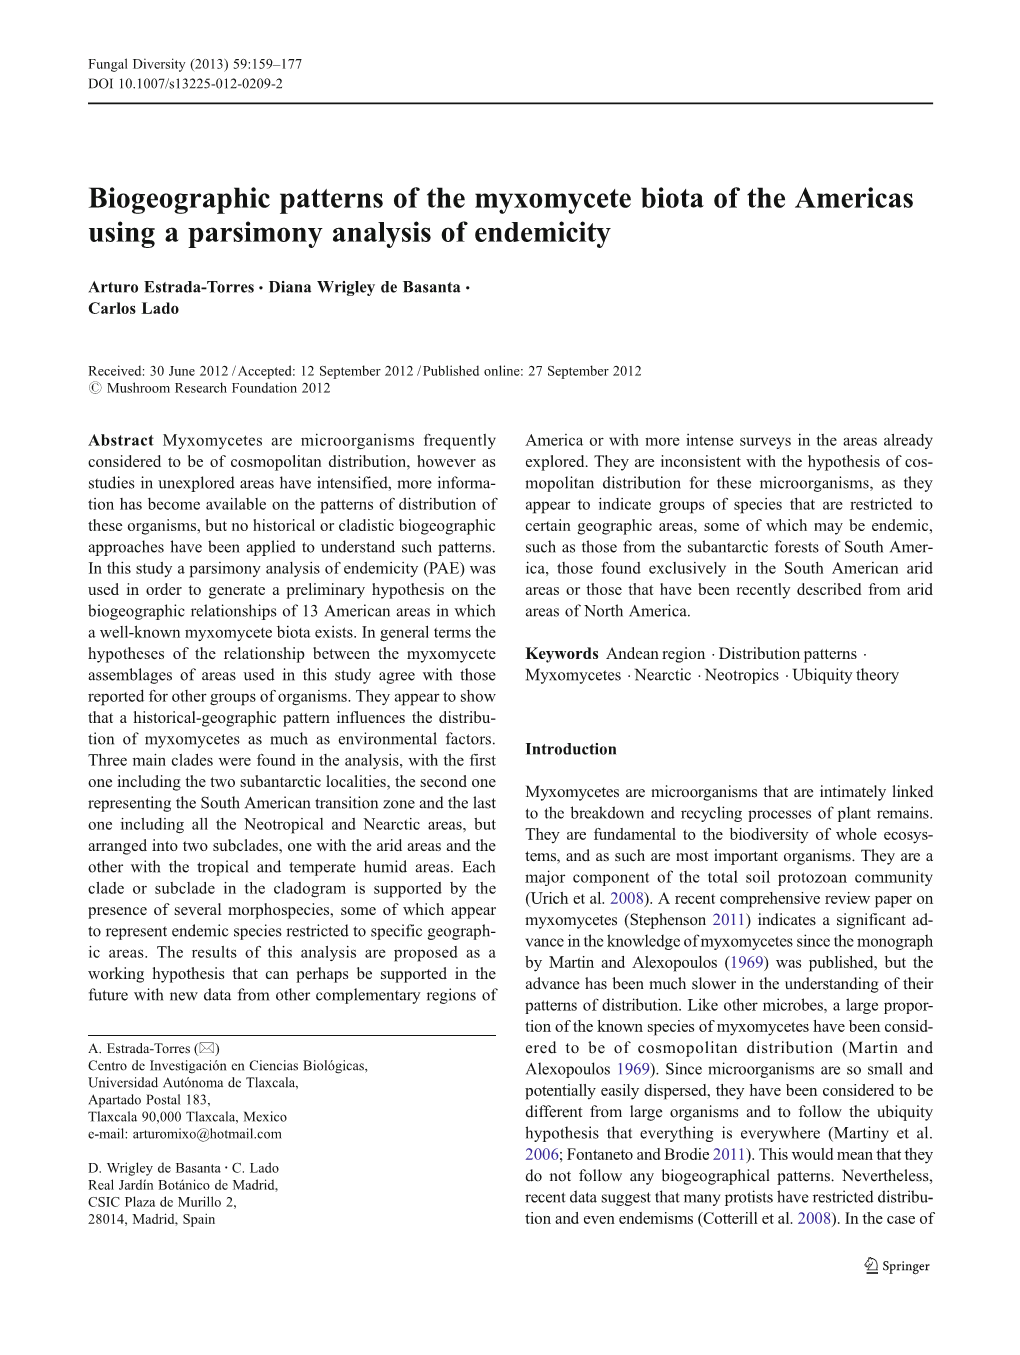 Biogeographic Patterns of the Myxomycete Biota of the Americas Using a Parsimony Analysis of Endemicity